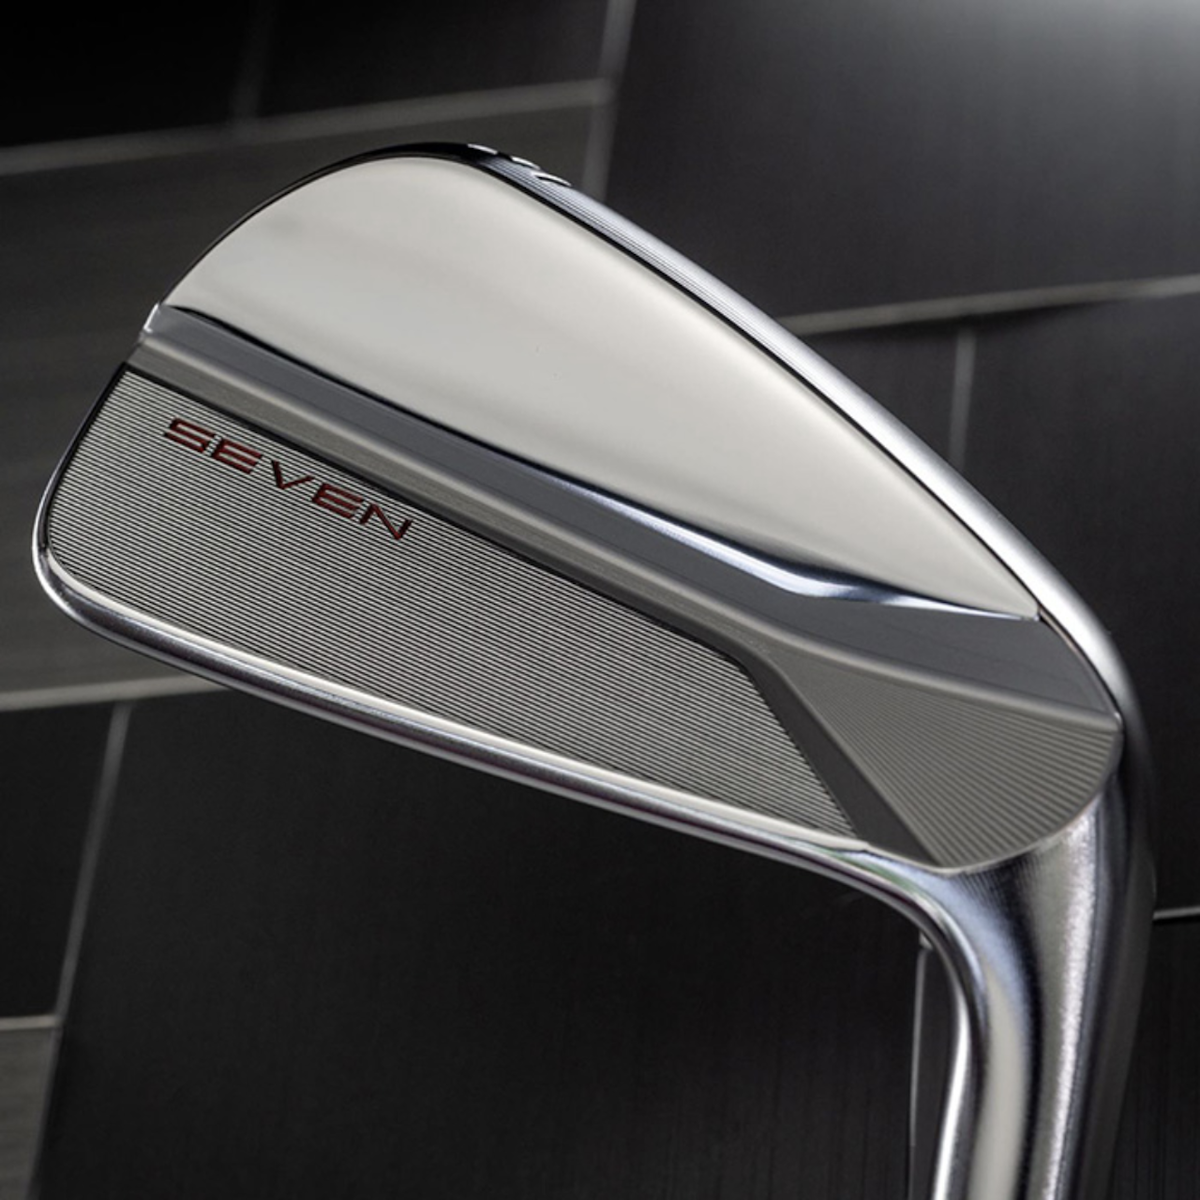 Seven MB Irons